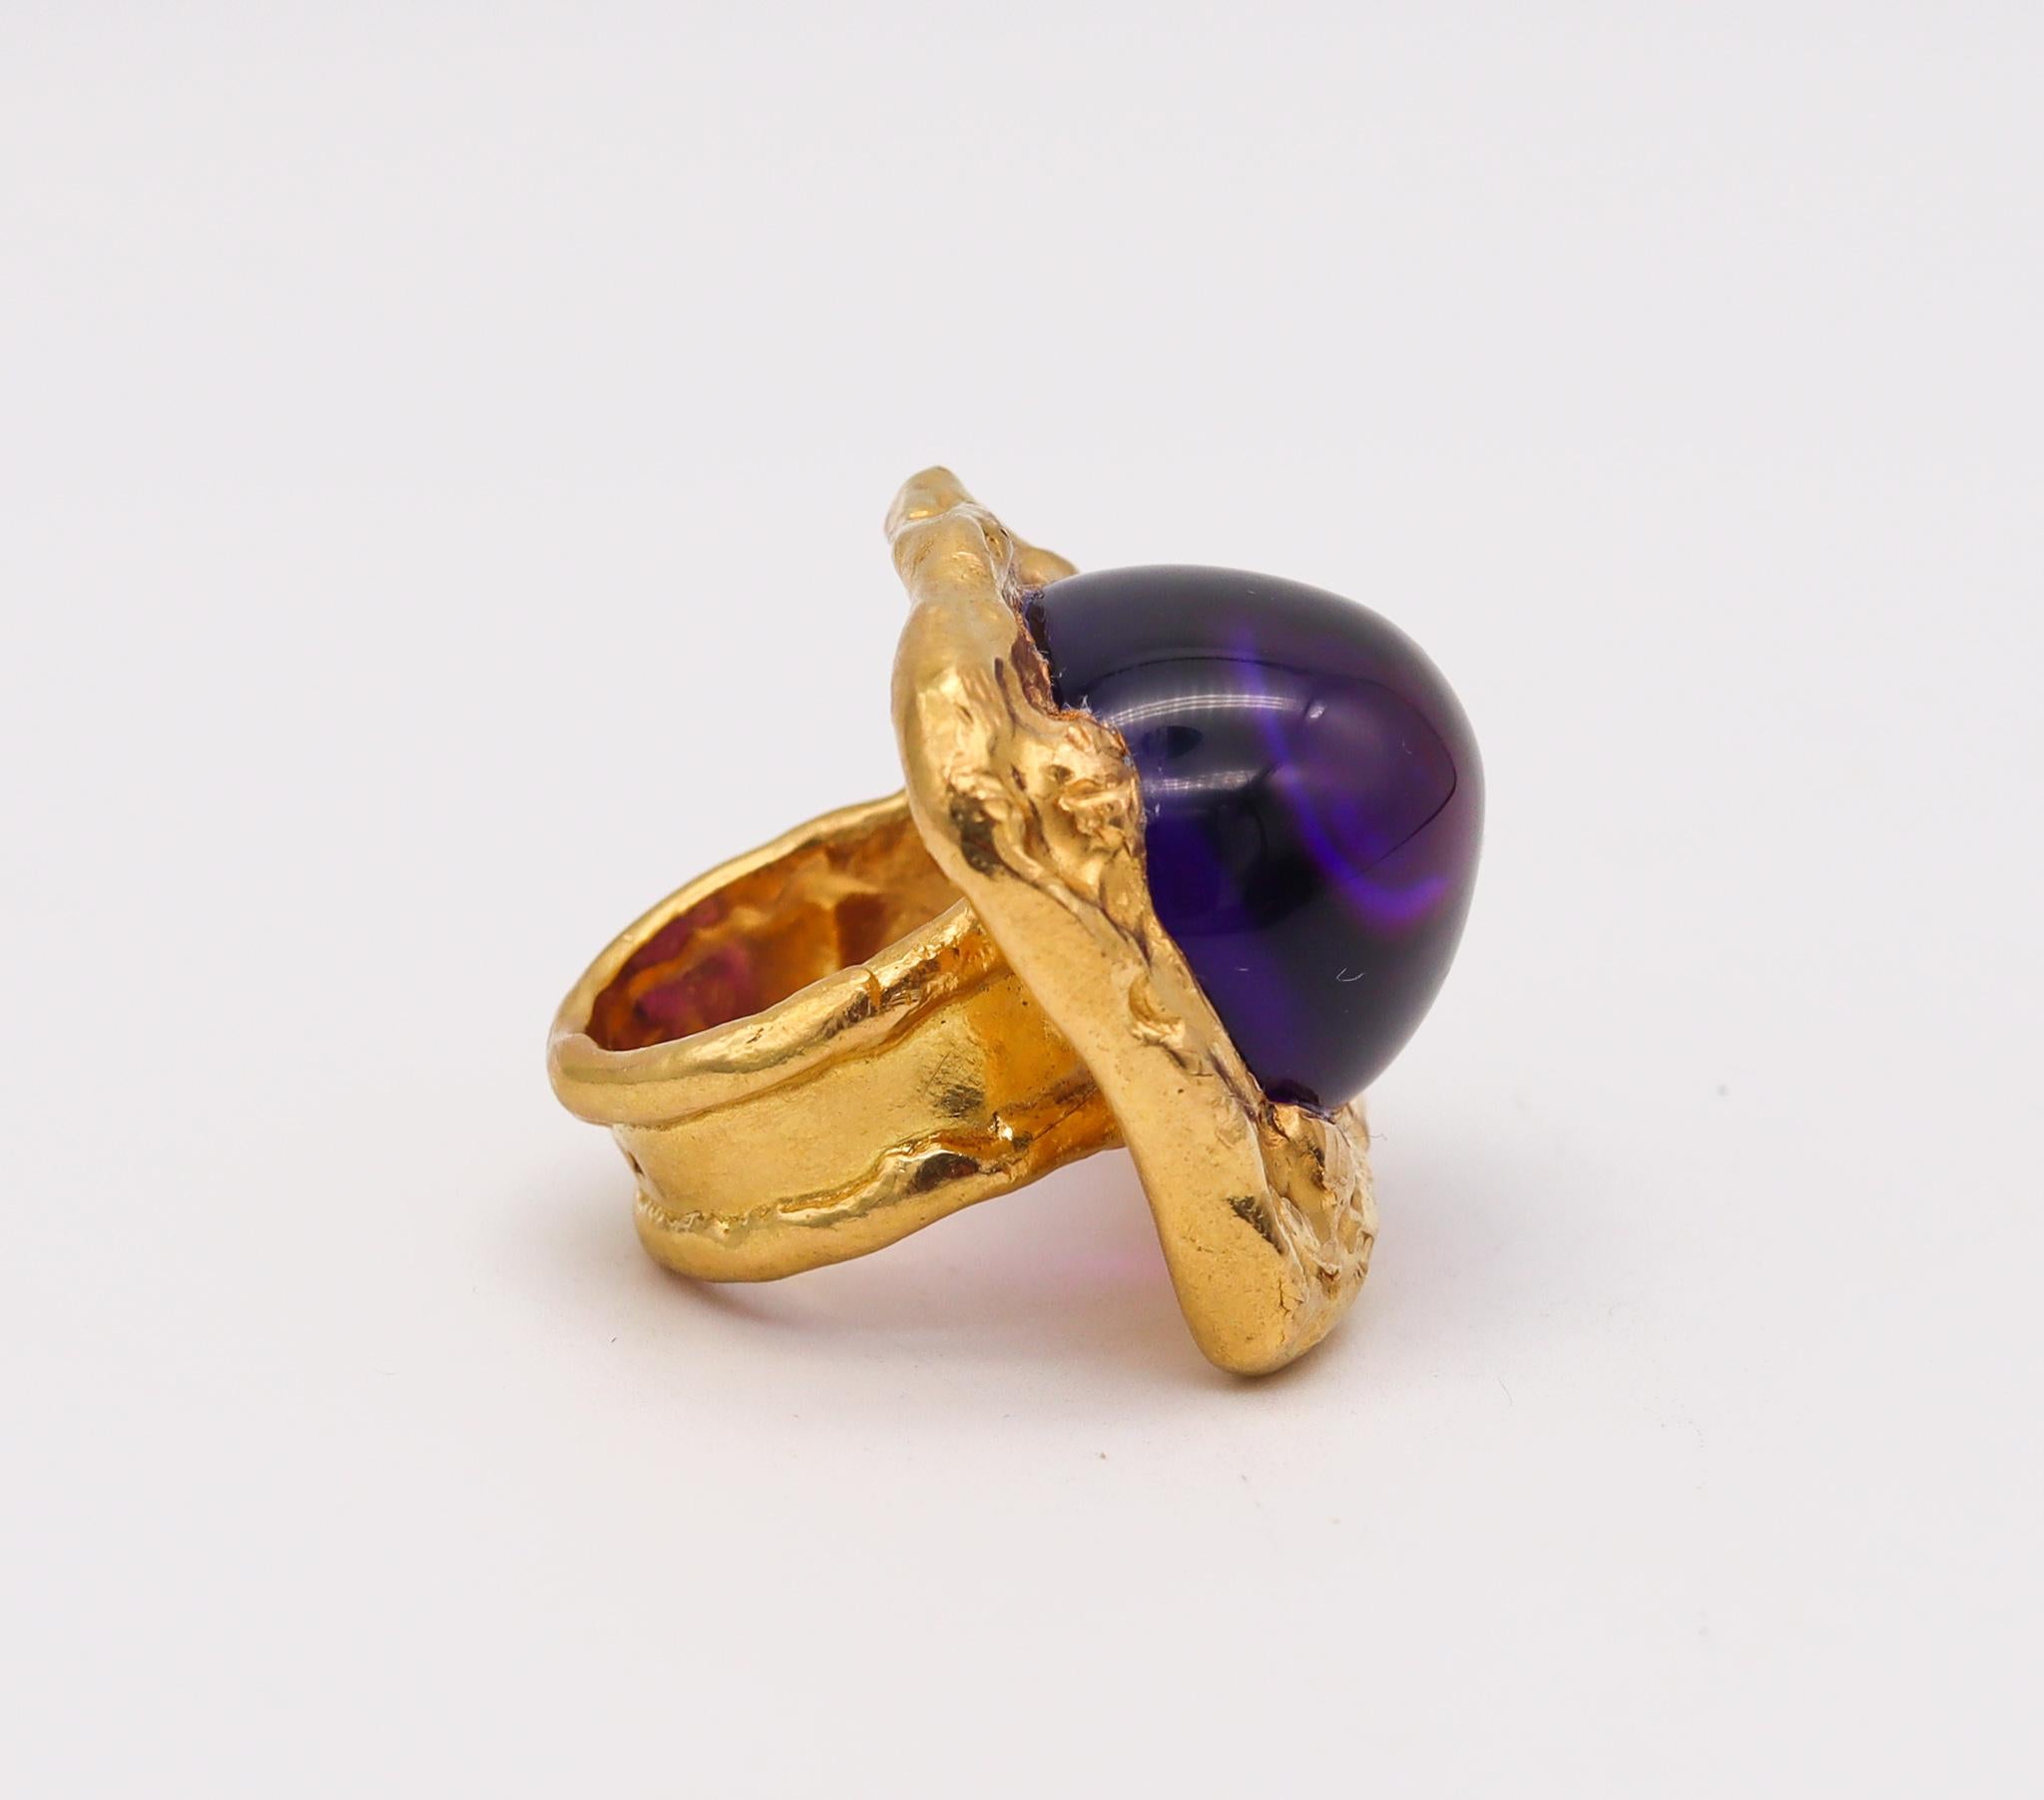 Modernist Jean Mahie 1977 Paris Rare Sculptural Cocktail Ring in Solid 22Kt Yellow Gold